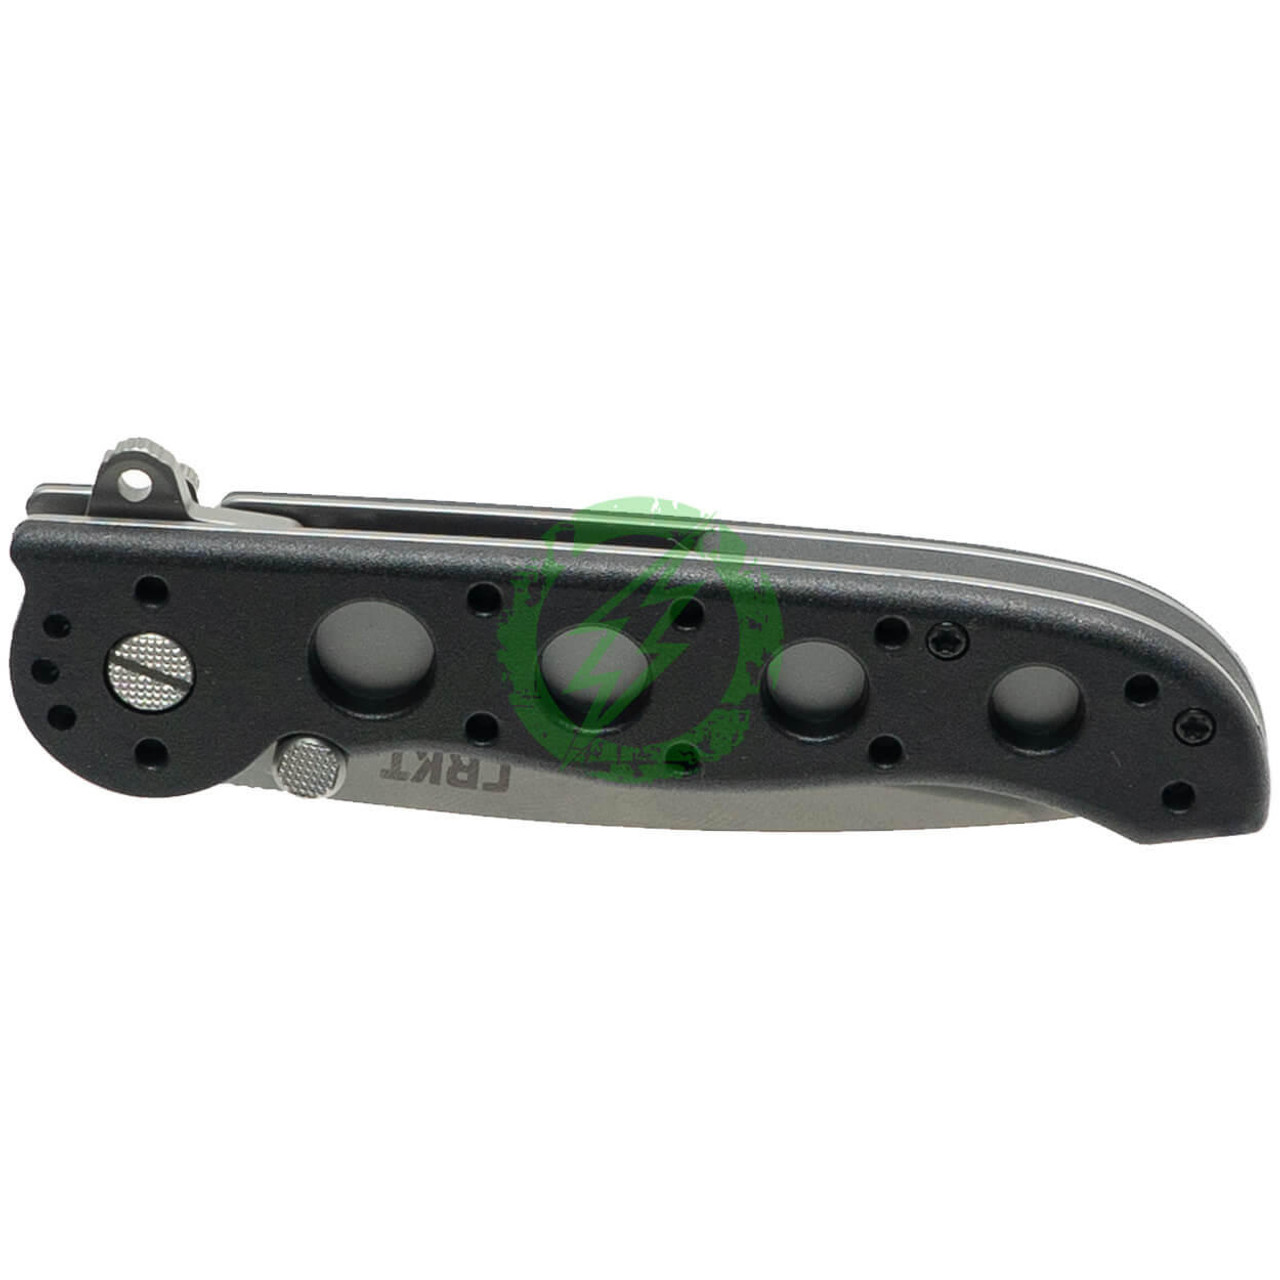 CRKT (Columbia River Knife Tool) CRKT M16-12Z Tanto with Triple Point Serrations Folding Knife with AUS 8 Bead Blast Blade & Glass Reinforced Nylon Handle 